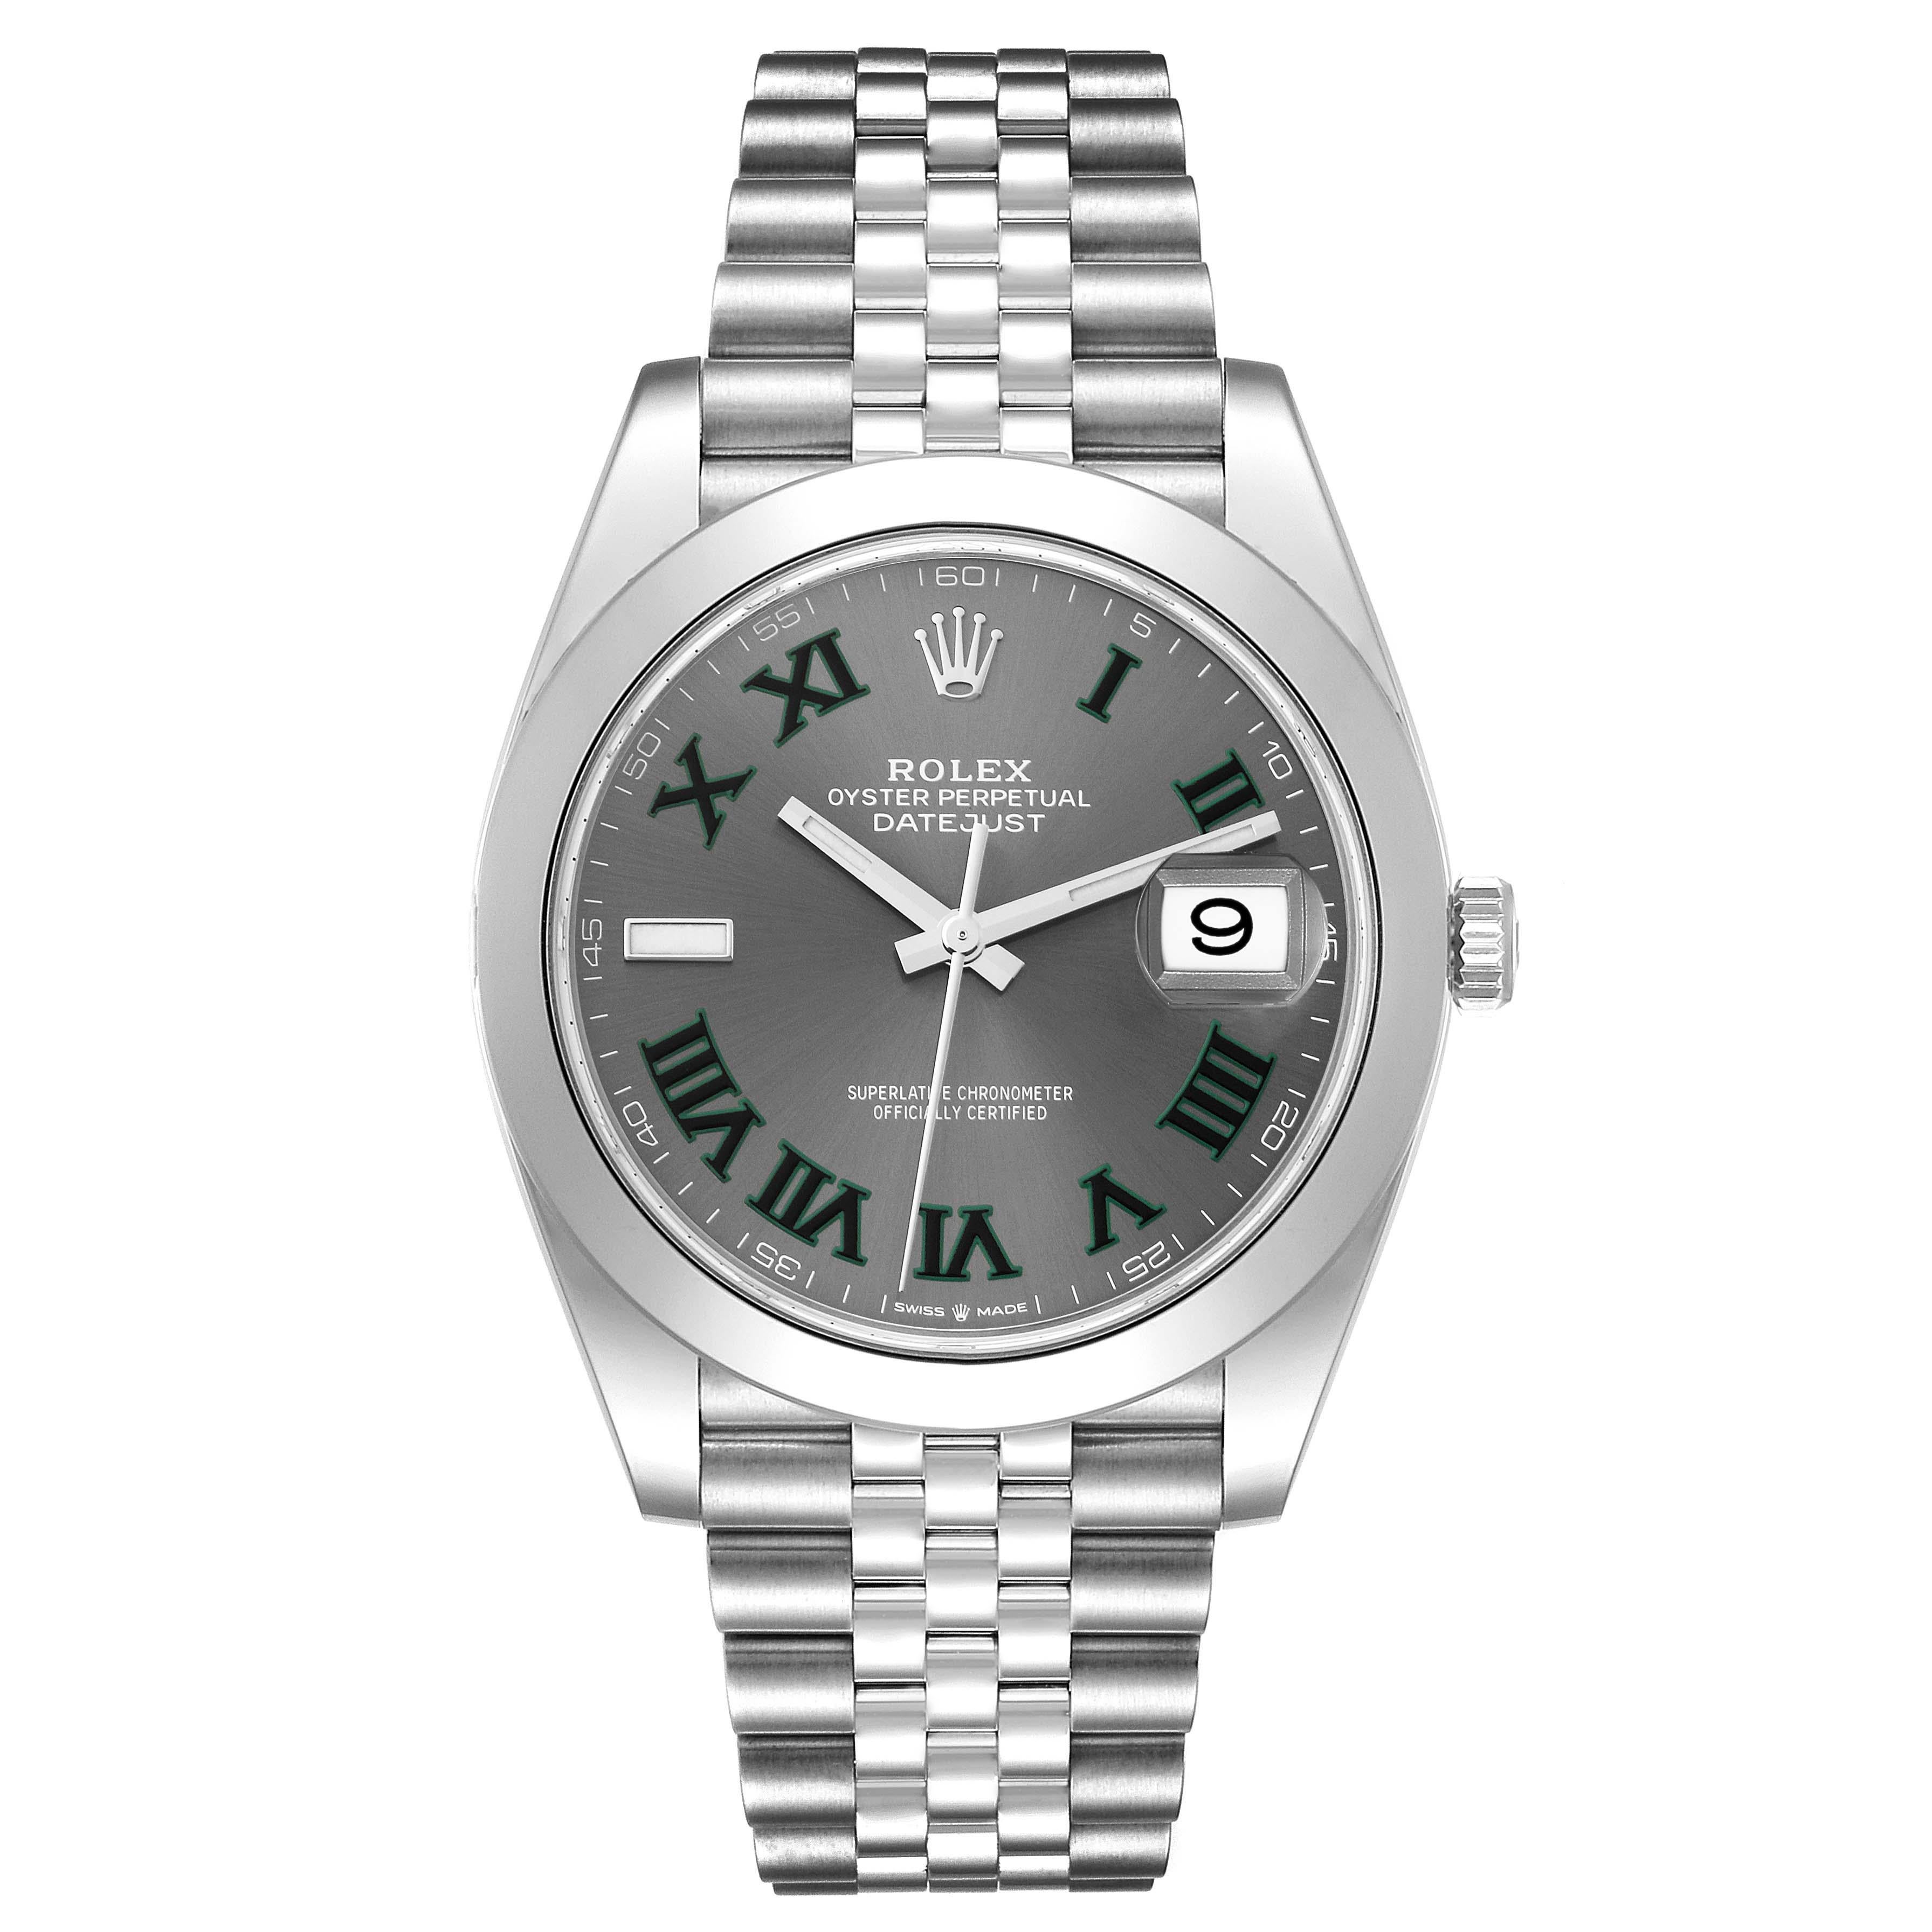 Rolex Datejust 41 Grey Green Wimbledon Dial Steel Mens Watch 126300 Box Card. Officially certified chronometer automatic self-winding movement with quickset date. Stainless steel case 41 mm in diameter. Rolex logo on a crown. Stainless steel smooth